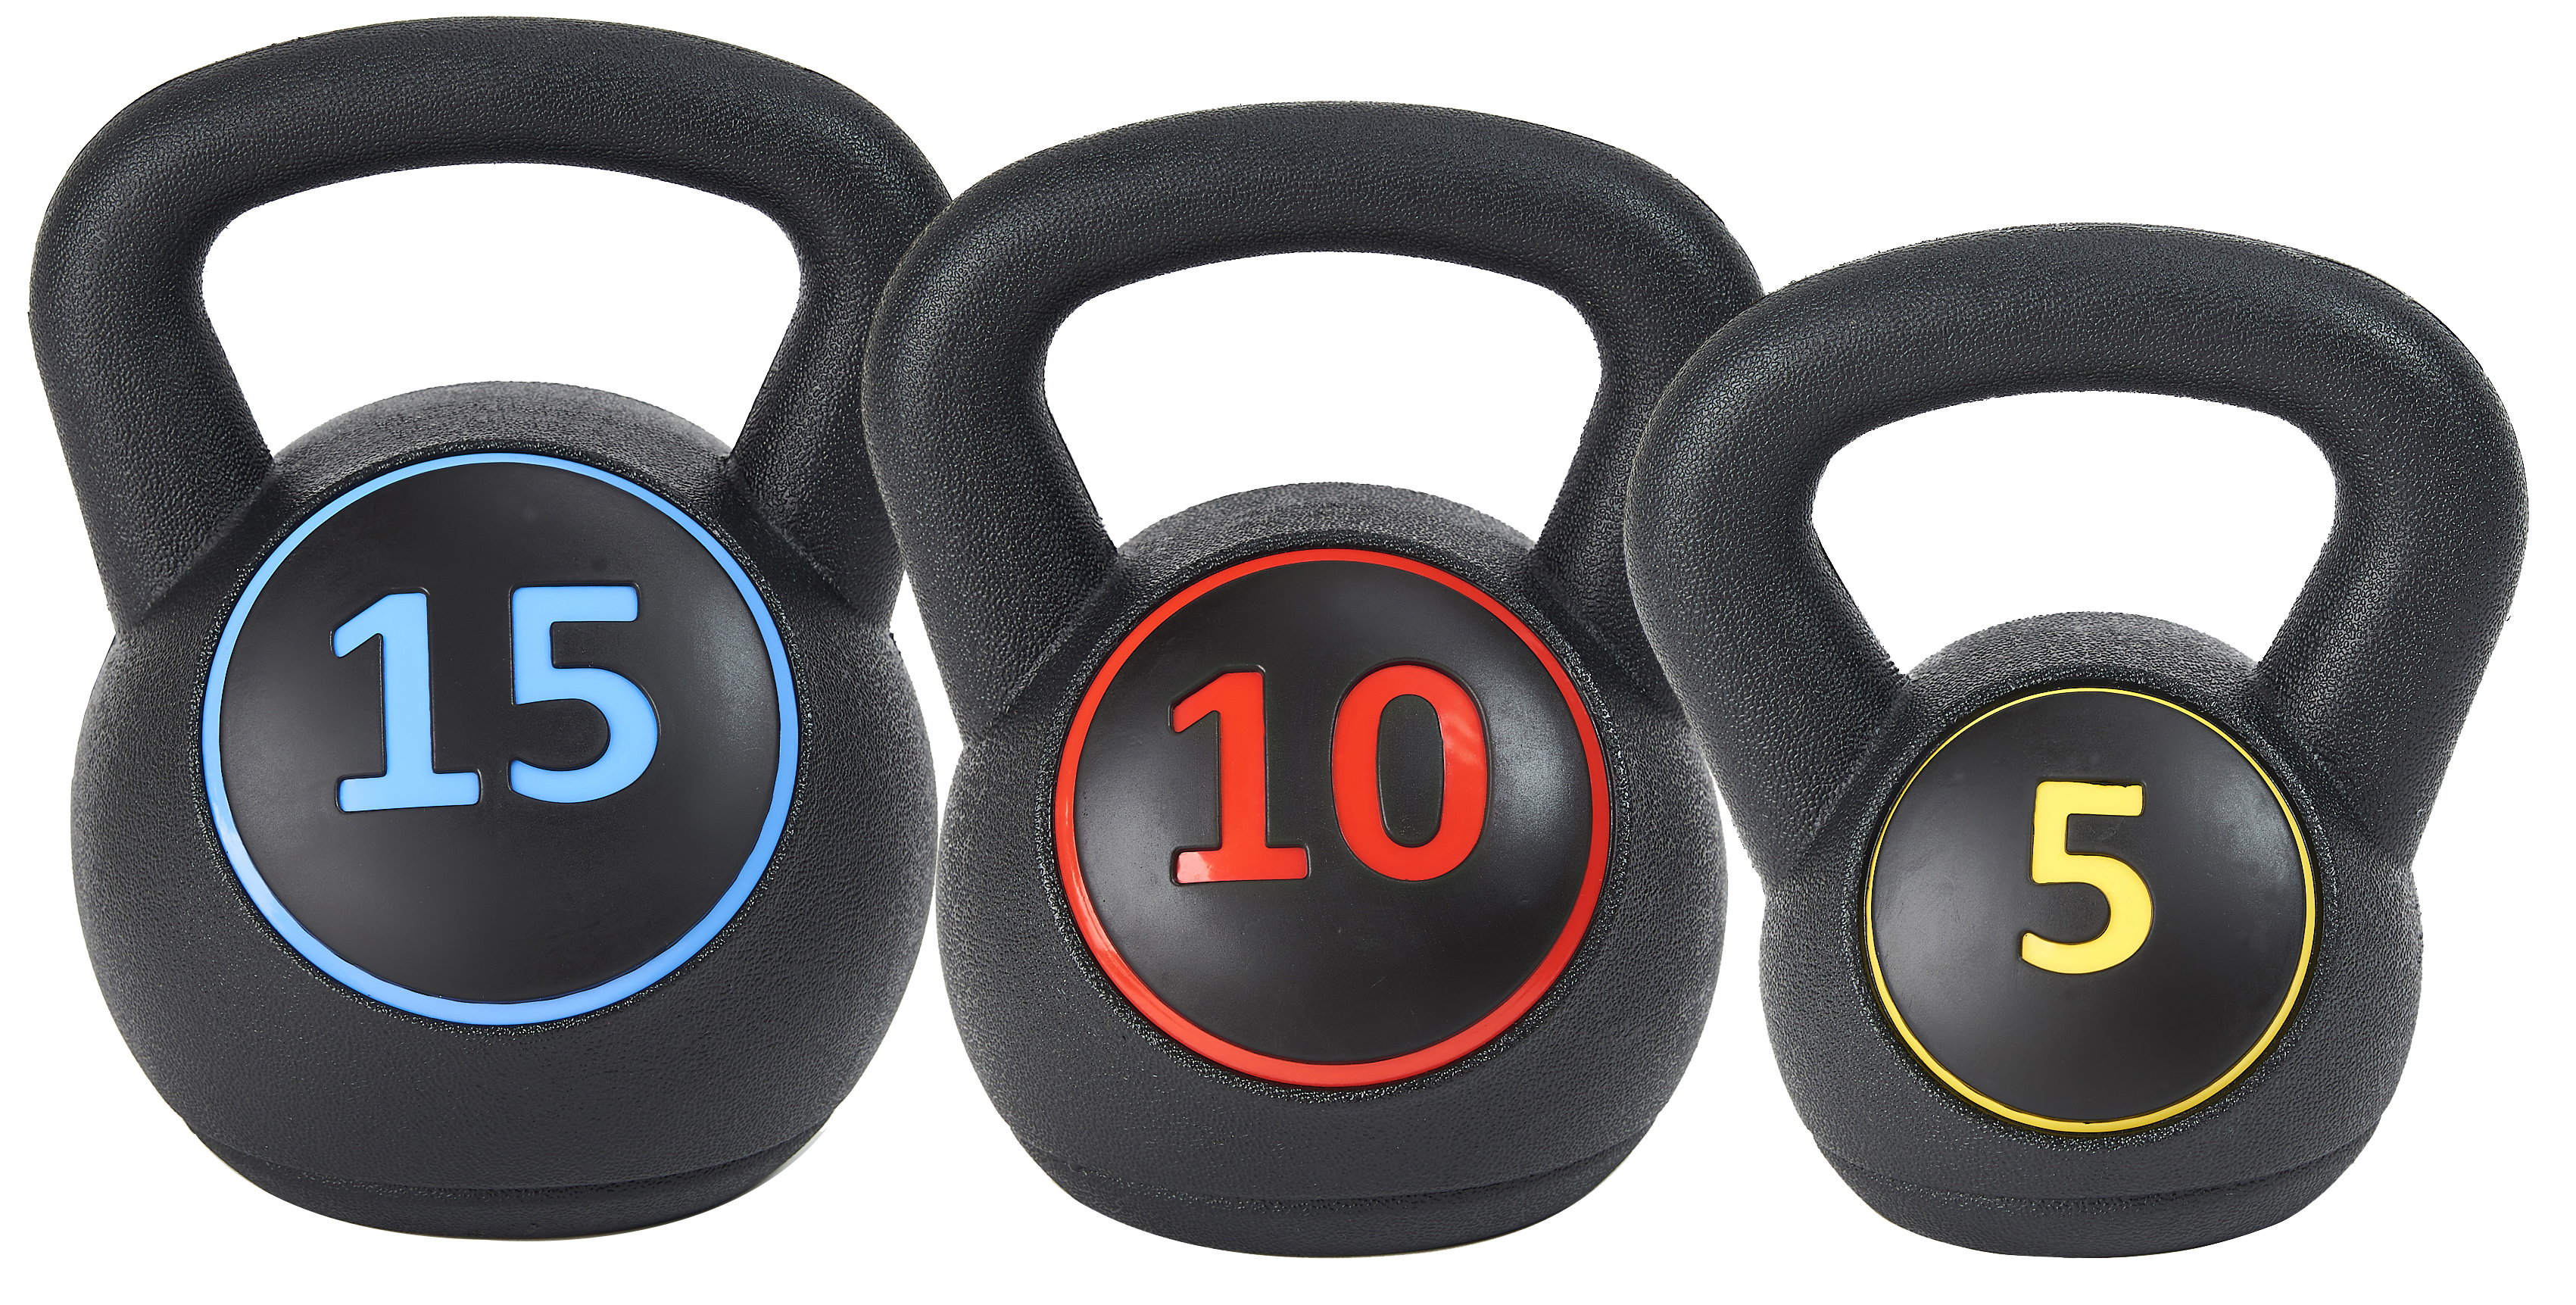 BalanceFrom Wide Grip 3-Piece Kettlebell Exercise Fitness Weight Set, Include 5 lbs, 10 lbs, 15 lbs - image 3 of 6